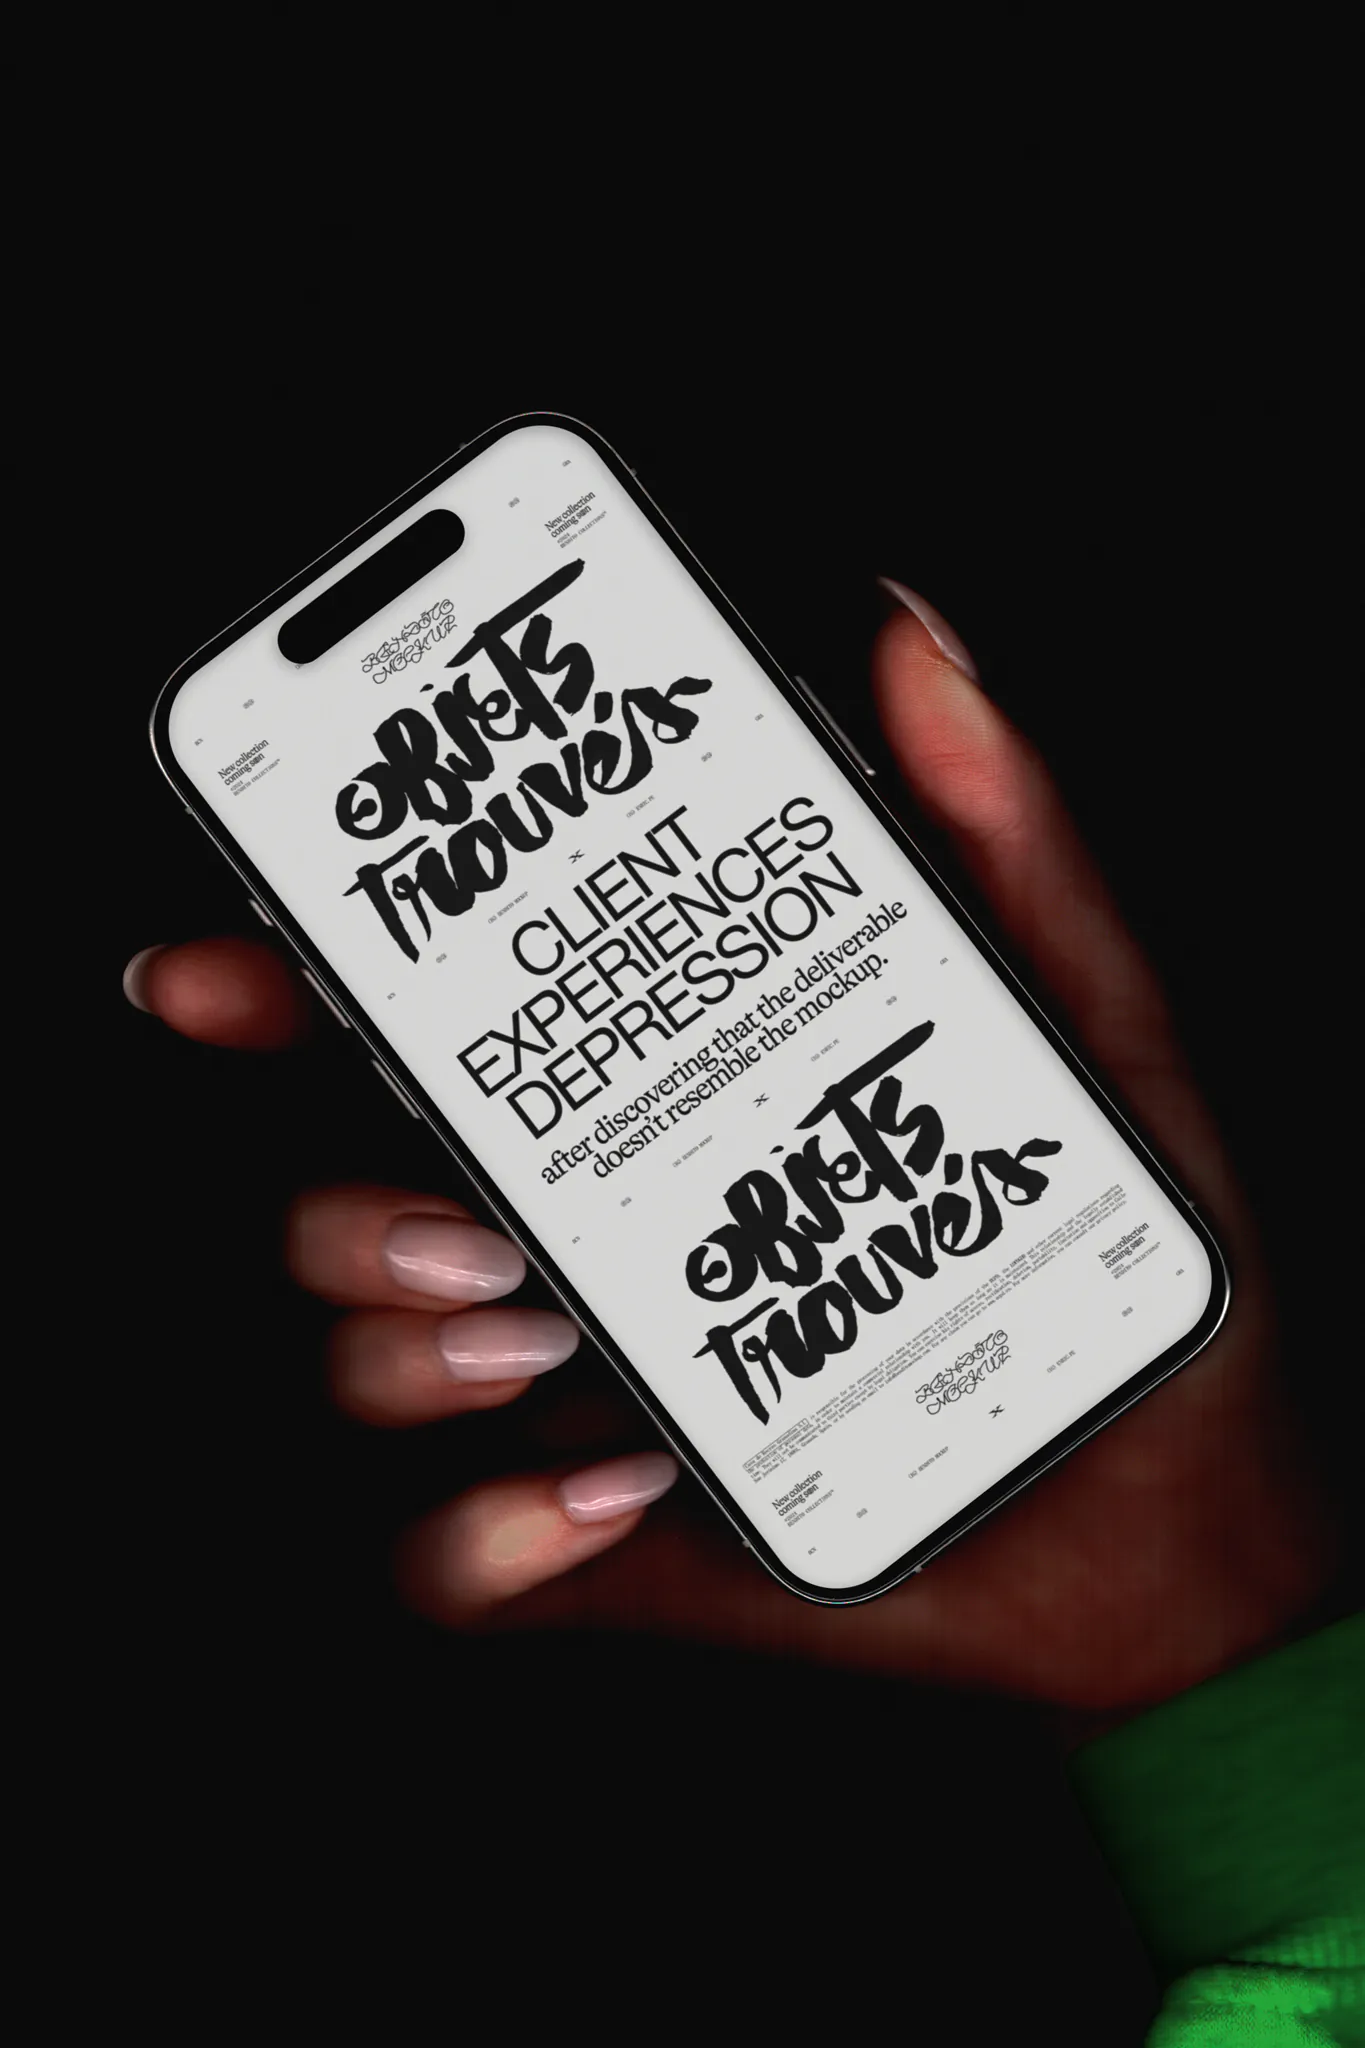 iPhone mockup being held by a human hand, iPhone mockup with scanned effect, device mockup with scanned texture, high resolution iPhone mockup being grasped by a hand with beautiful nails. PSD editable file.